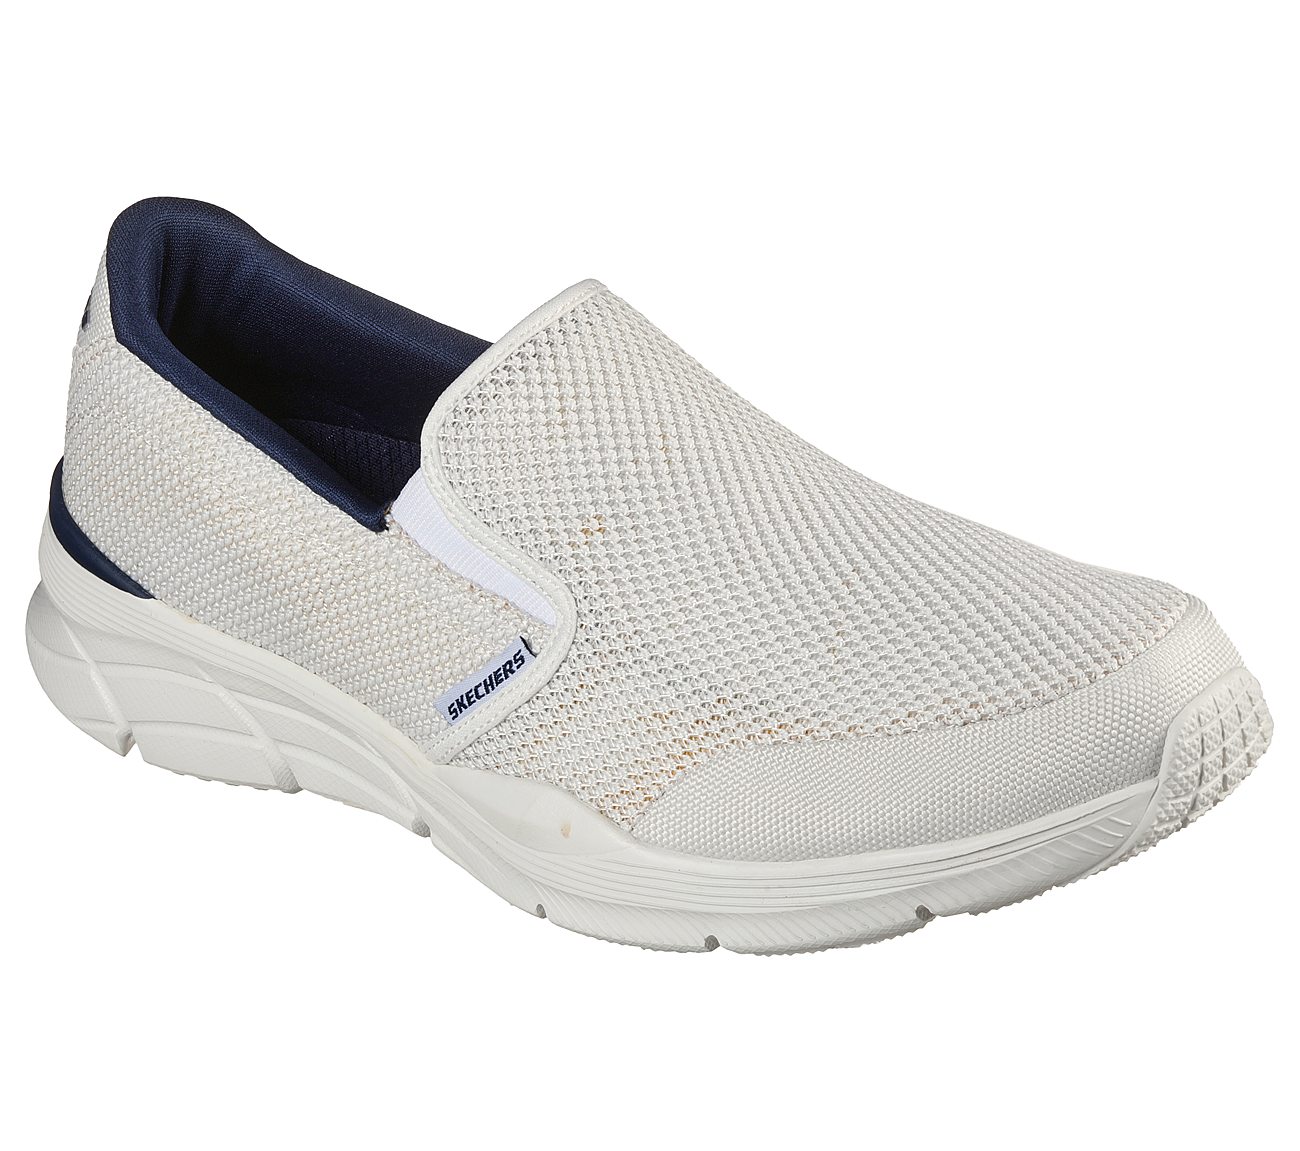 Buy SKECHERS Relaxed Fit: Equalizer 4.0 - Krimlin Sport Shoes